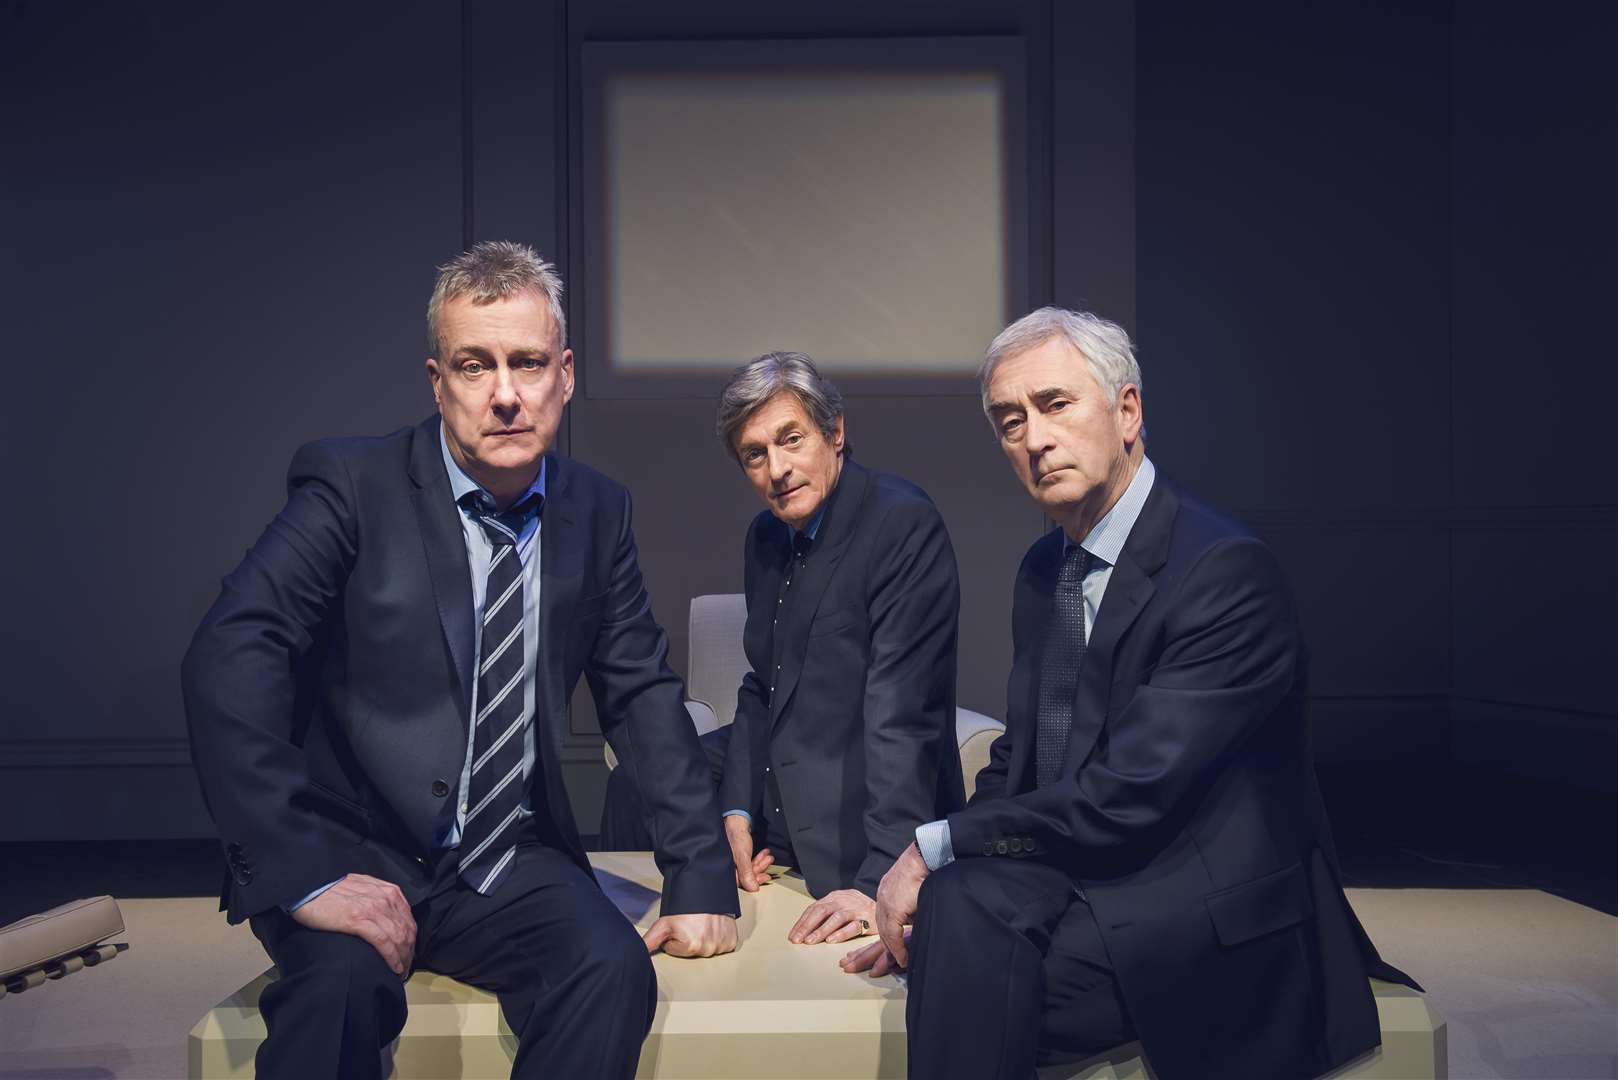 ART at the Marlowe Theatre, wth Stephen Tompkinson, Nigel Havers and Denis Lawson (2446300)